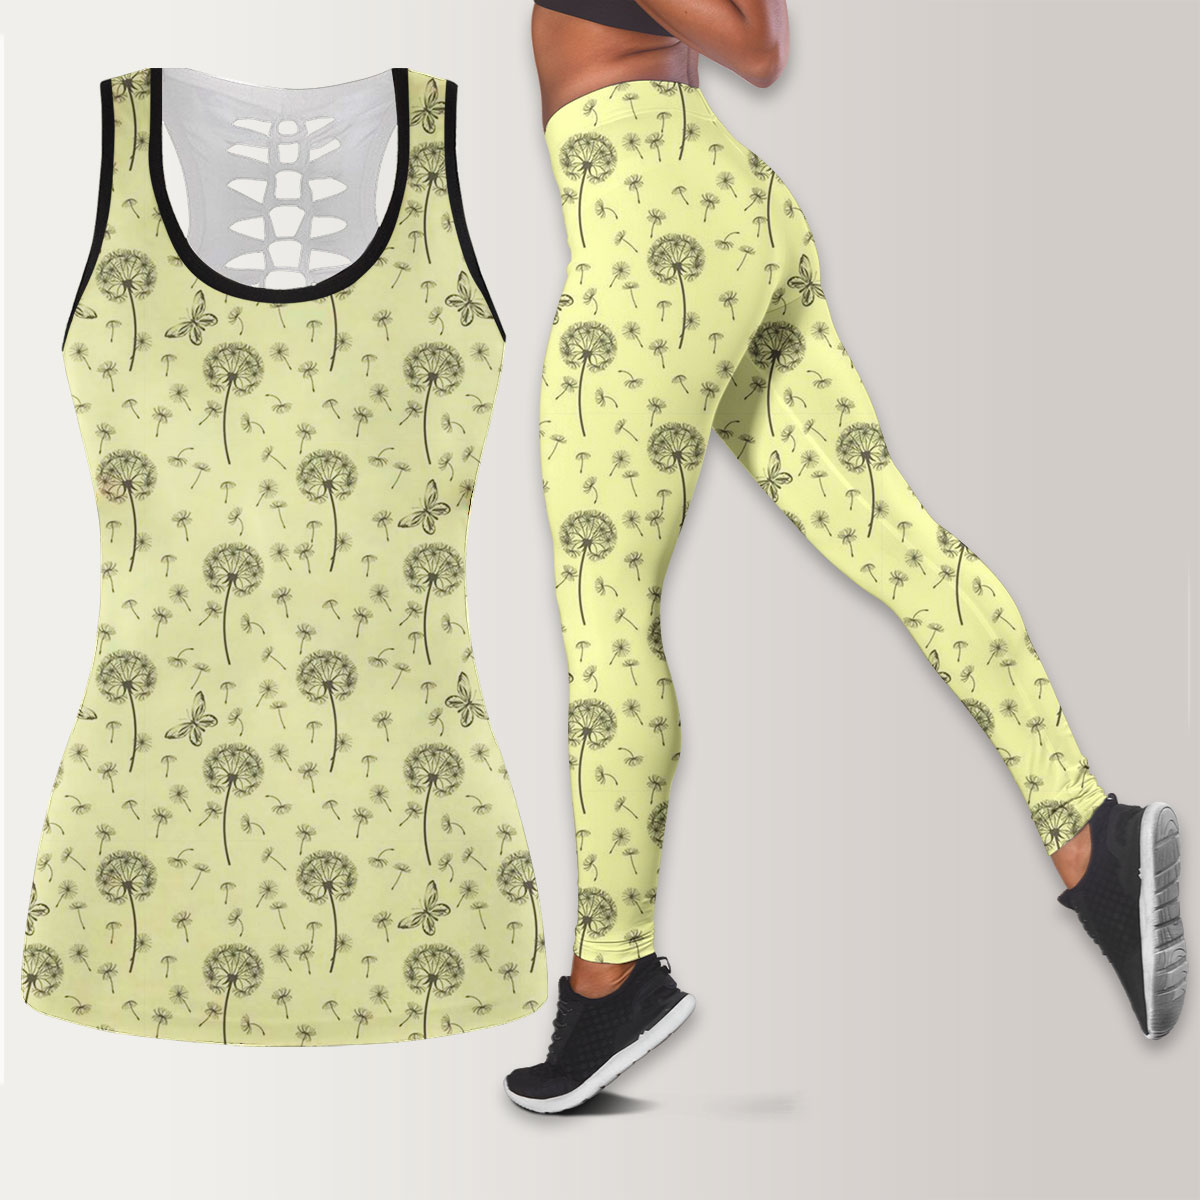 Dandelions And Butterflies On Yellow Background Legging Tank Top set